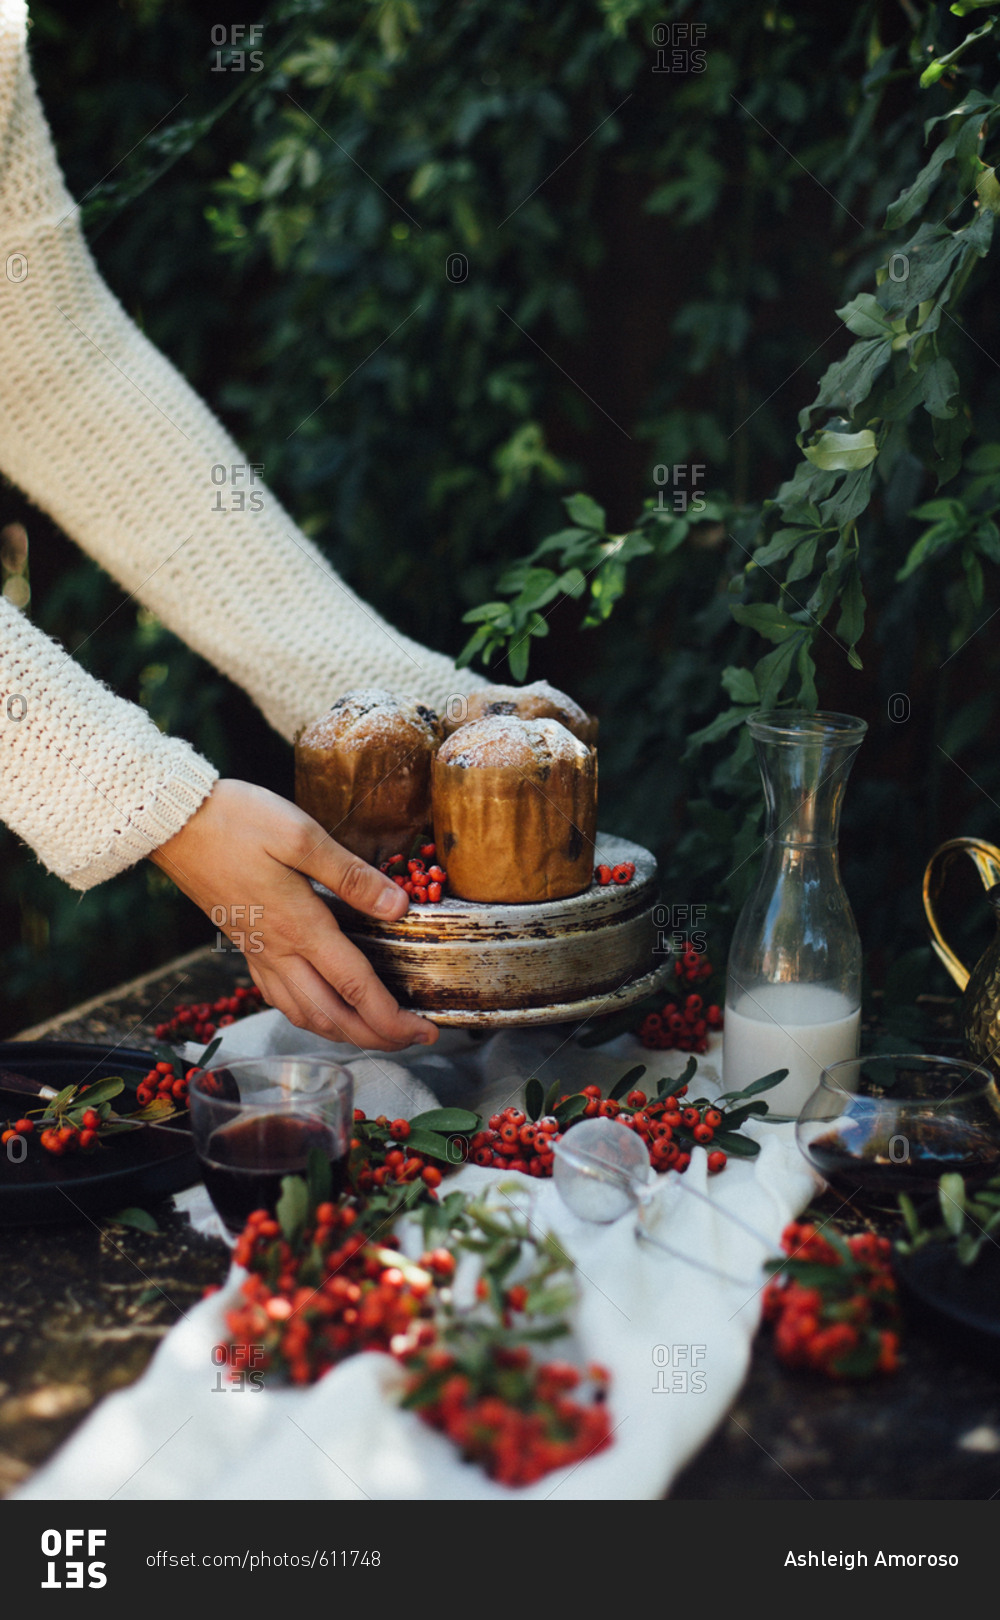 Woman placing holiday mini cakes on an outdoor table with berries